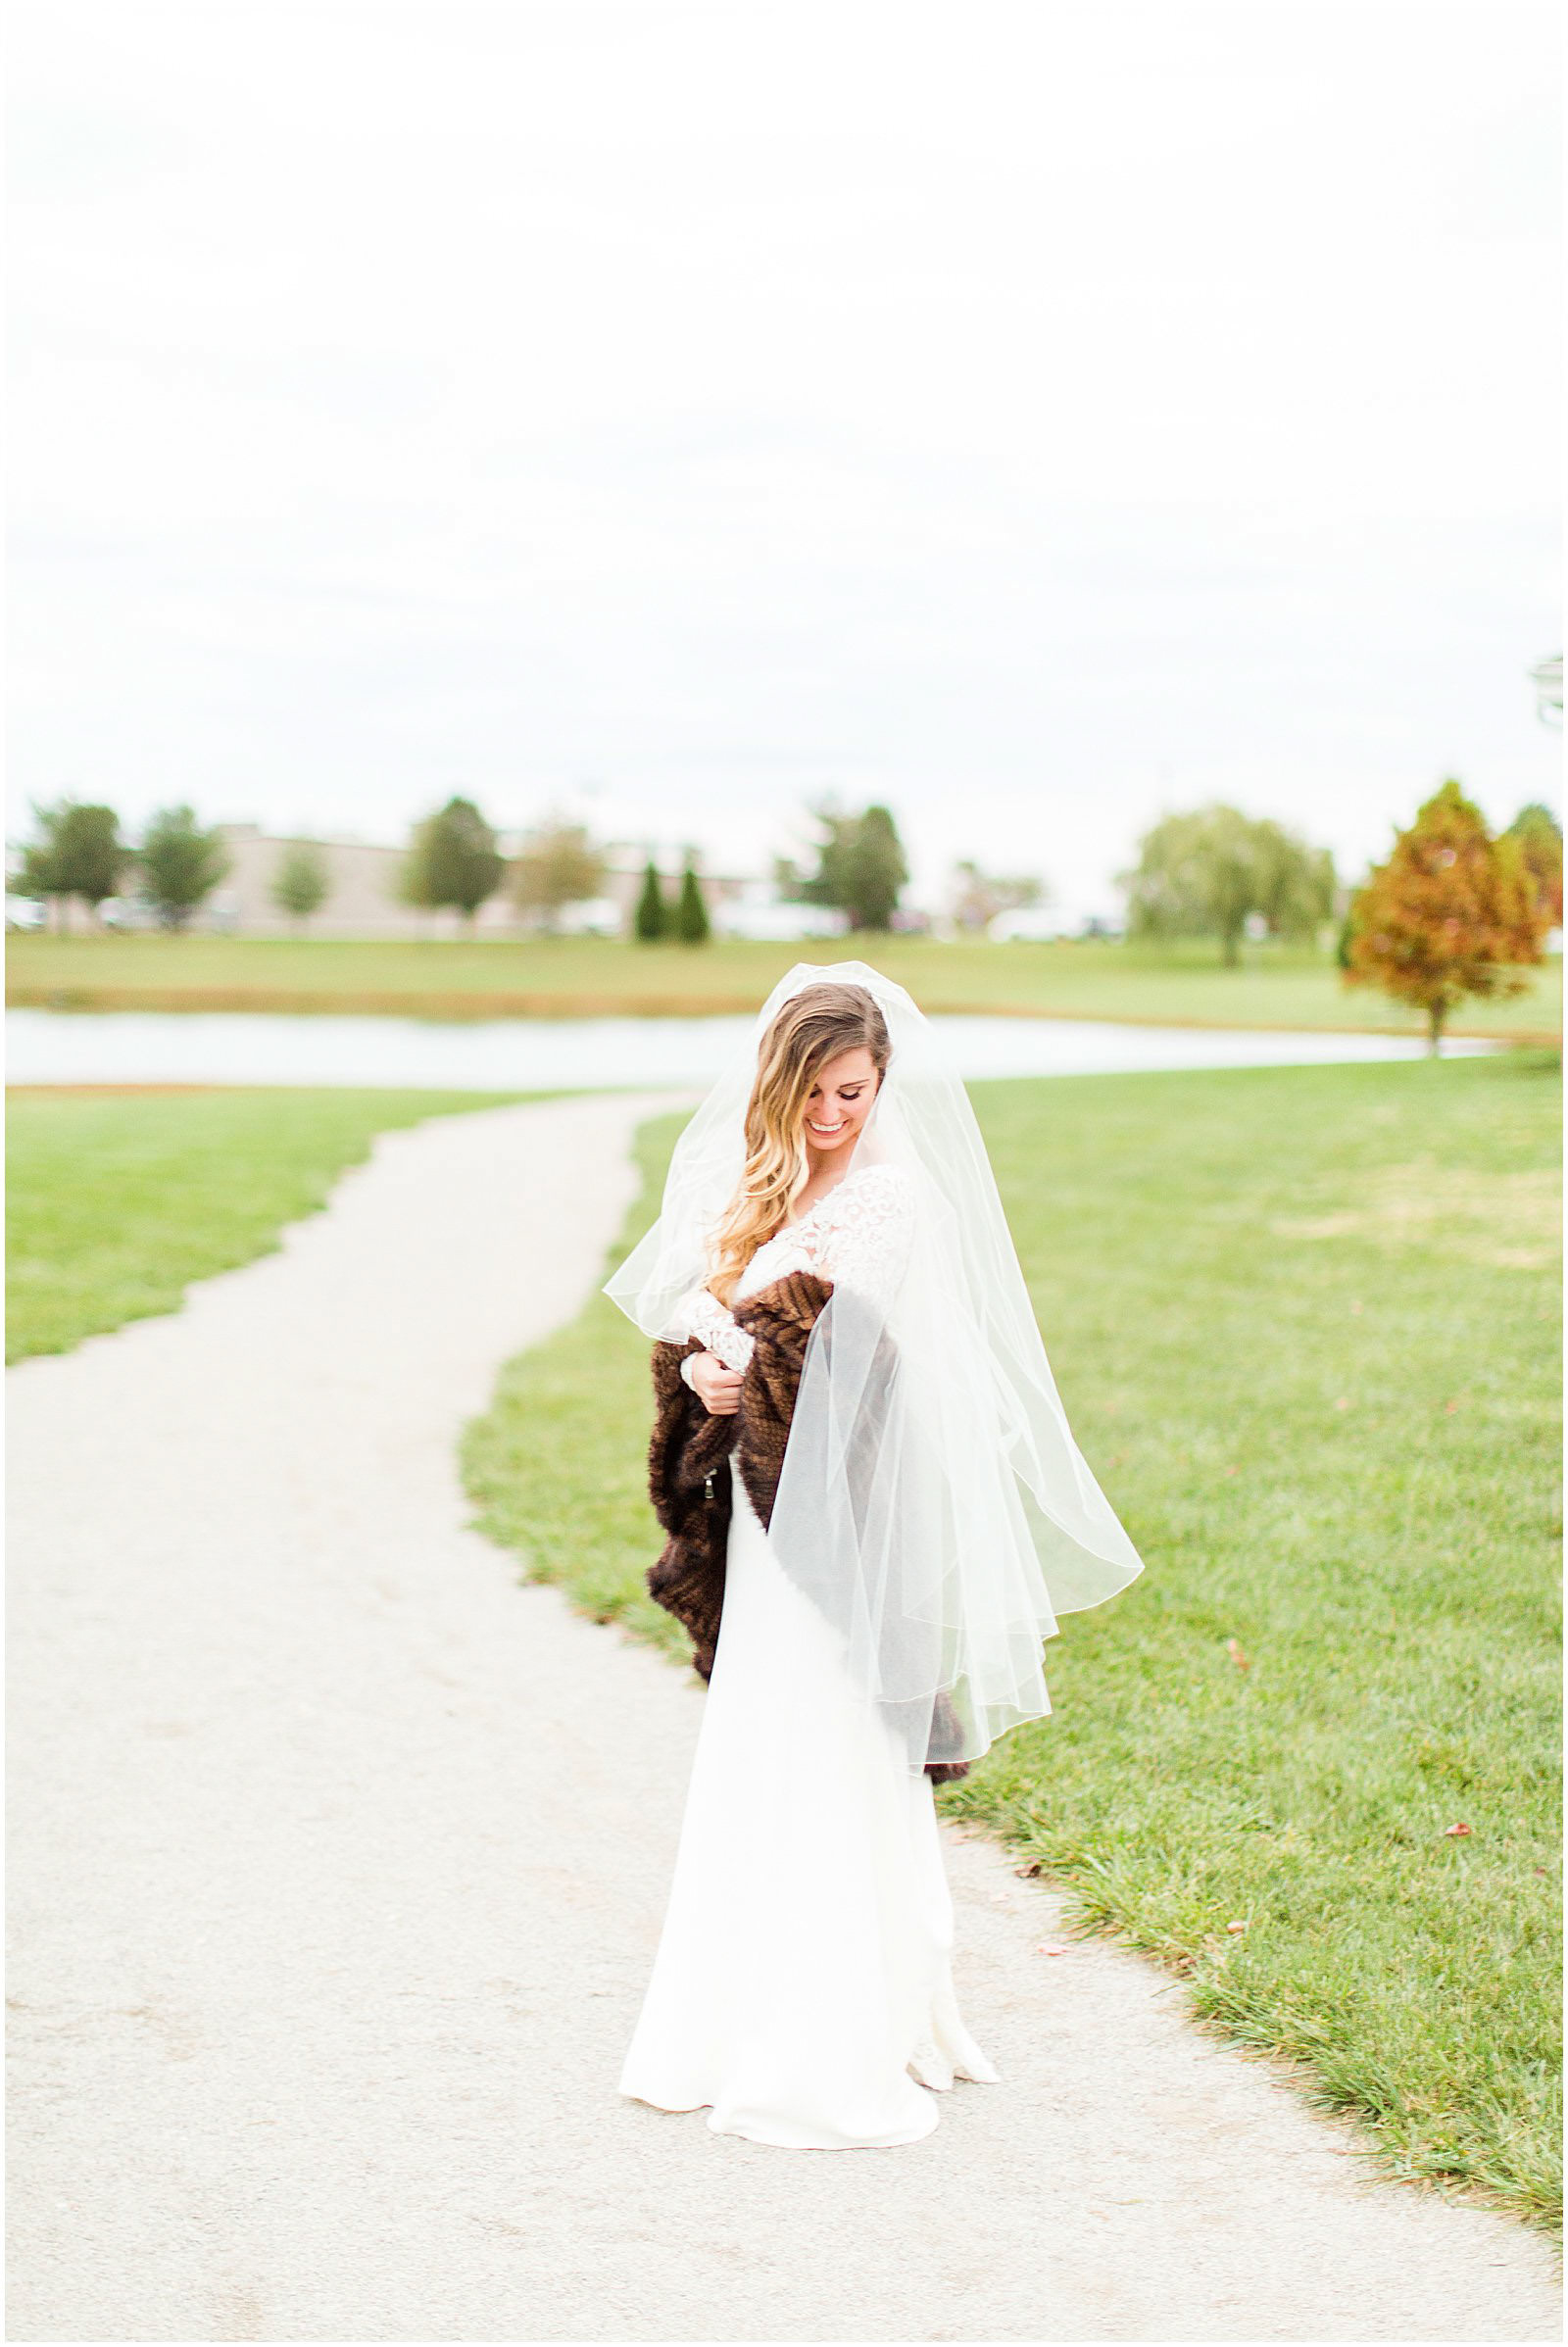 A Romantic Fall Wedding in Ferdinand, IN | Tori and Kyle | Bret and Brandie Photography 0140.jpg